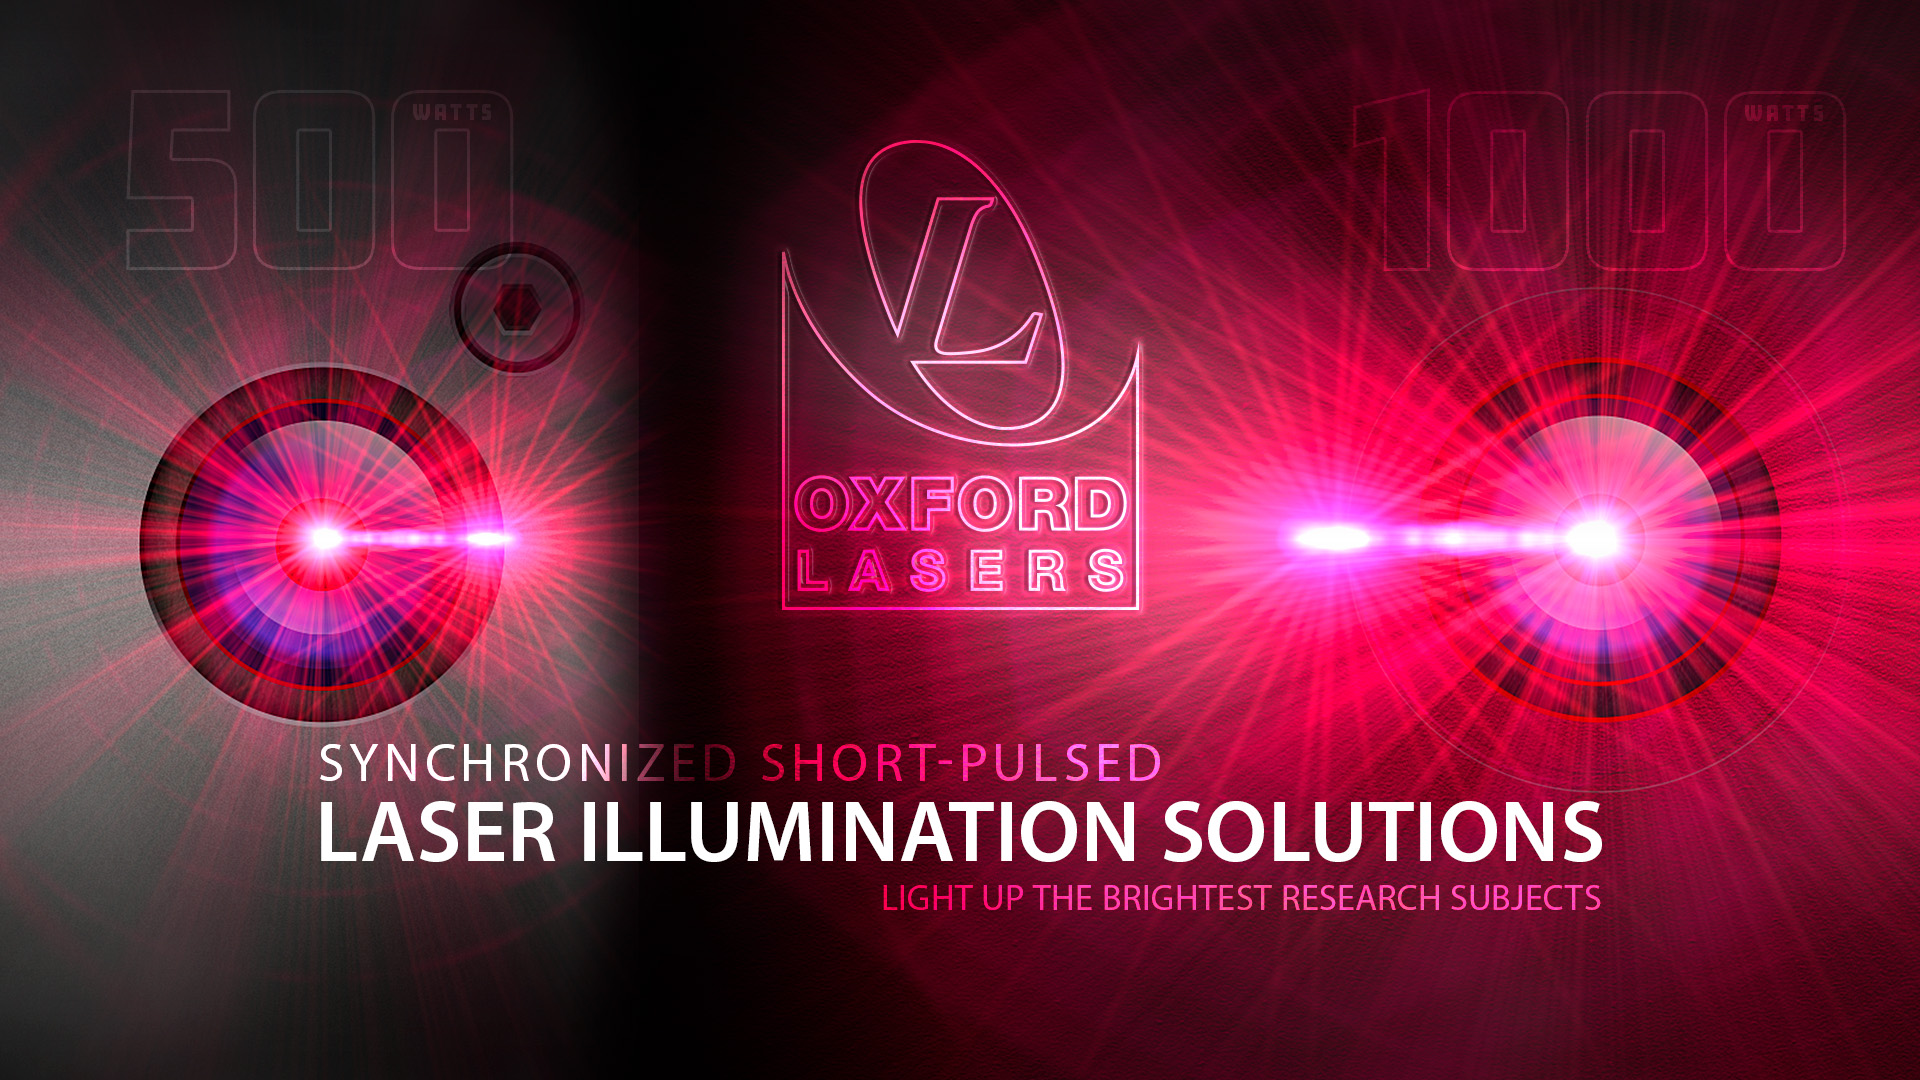 Oxford Lasers – synchronized short-pulsed laser illumination solutions for ultra high-speed imaging feature image.